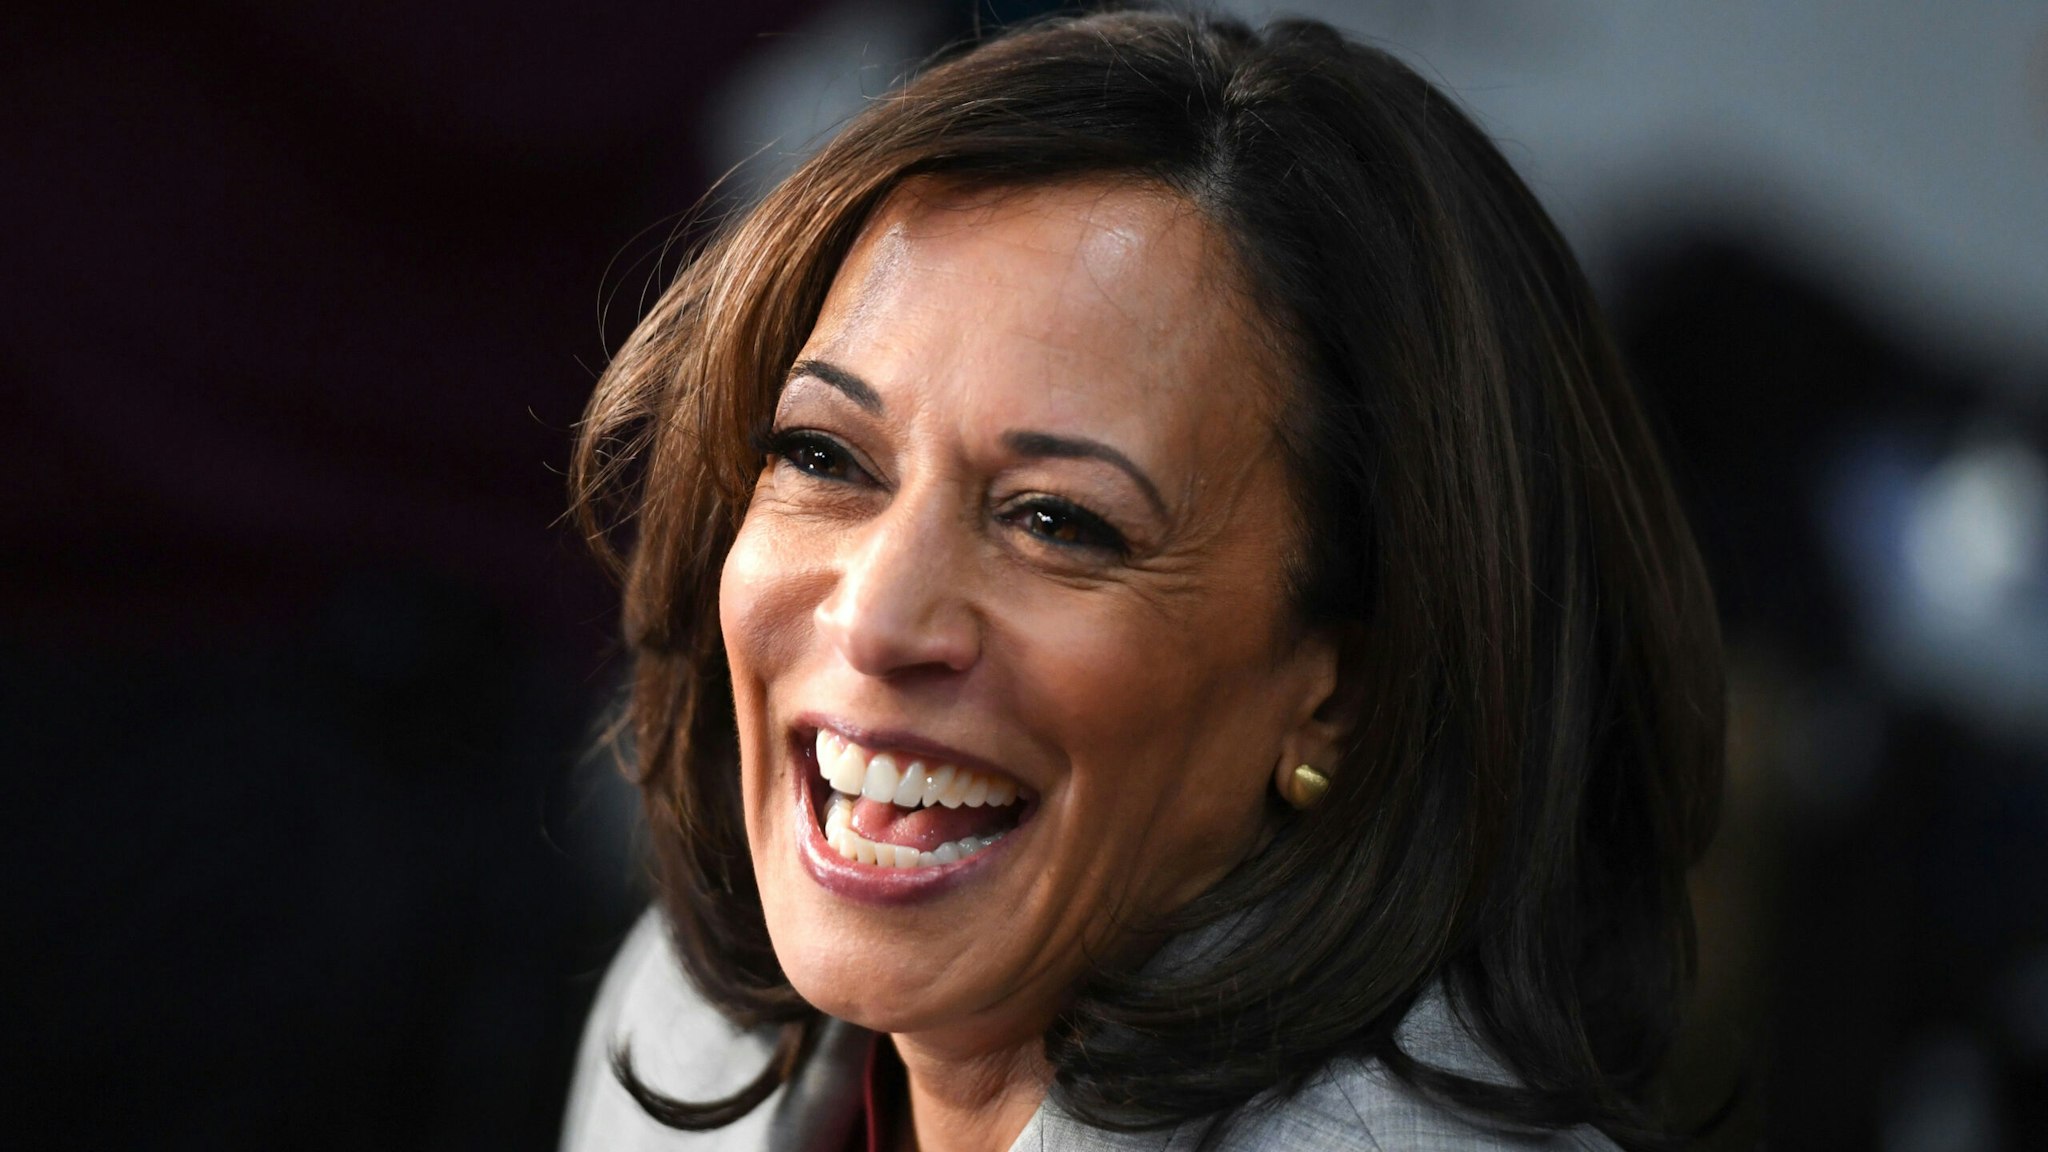 Democratic presidential hopeful California Senator Kamala Harris speaks to the press in the Spin Room after participating in the fifth Democratic primary debate of the 2020 presidential campaign season co-hosted by MSNBC and The Washington Post at Tyler Perry Studios in Atlanta, Georgia on November 20, 2019.